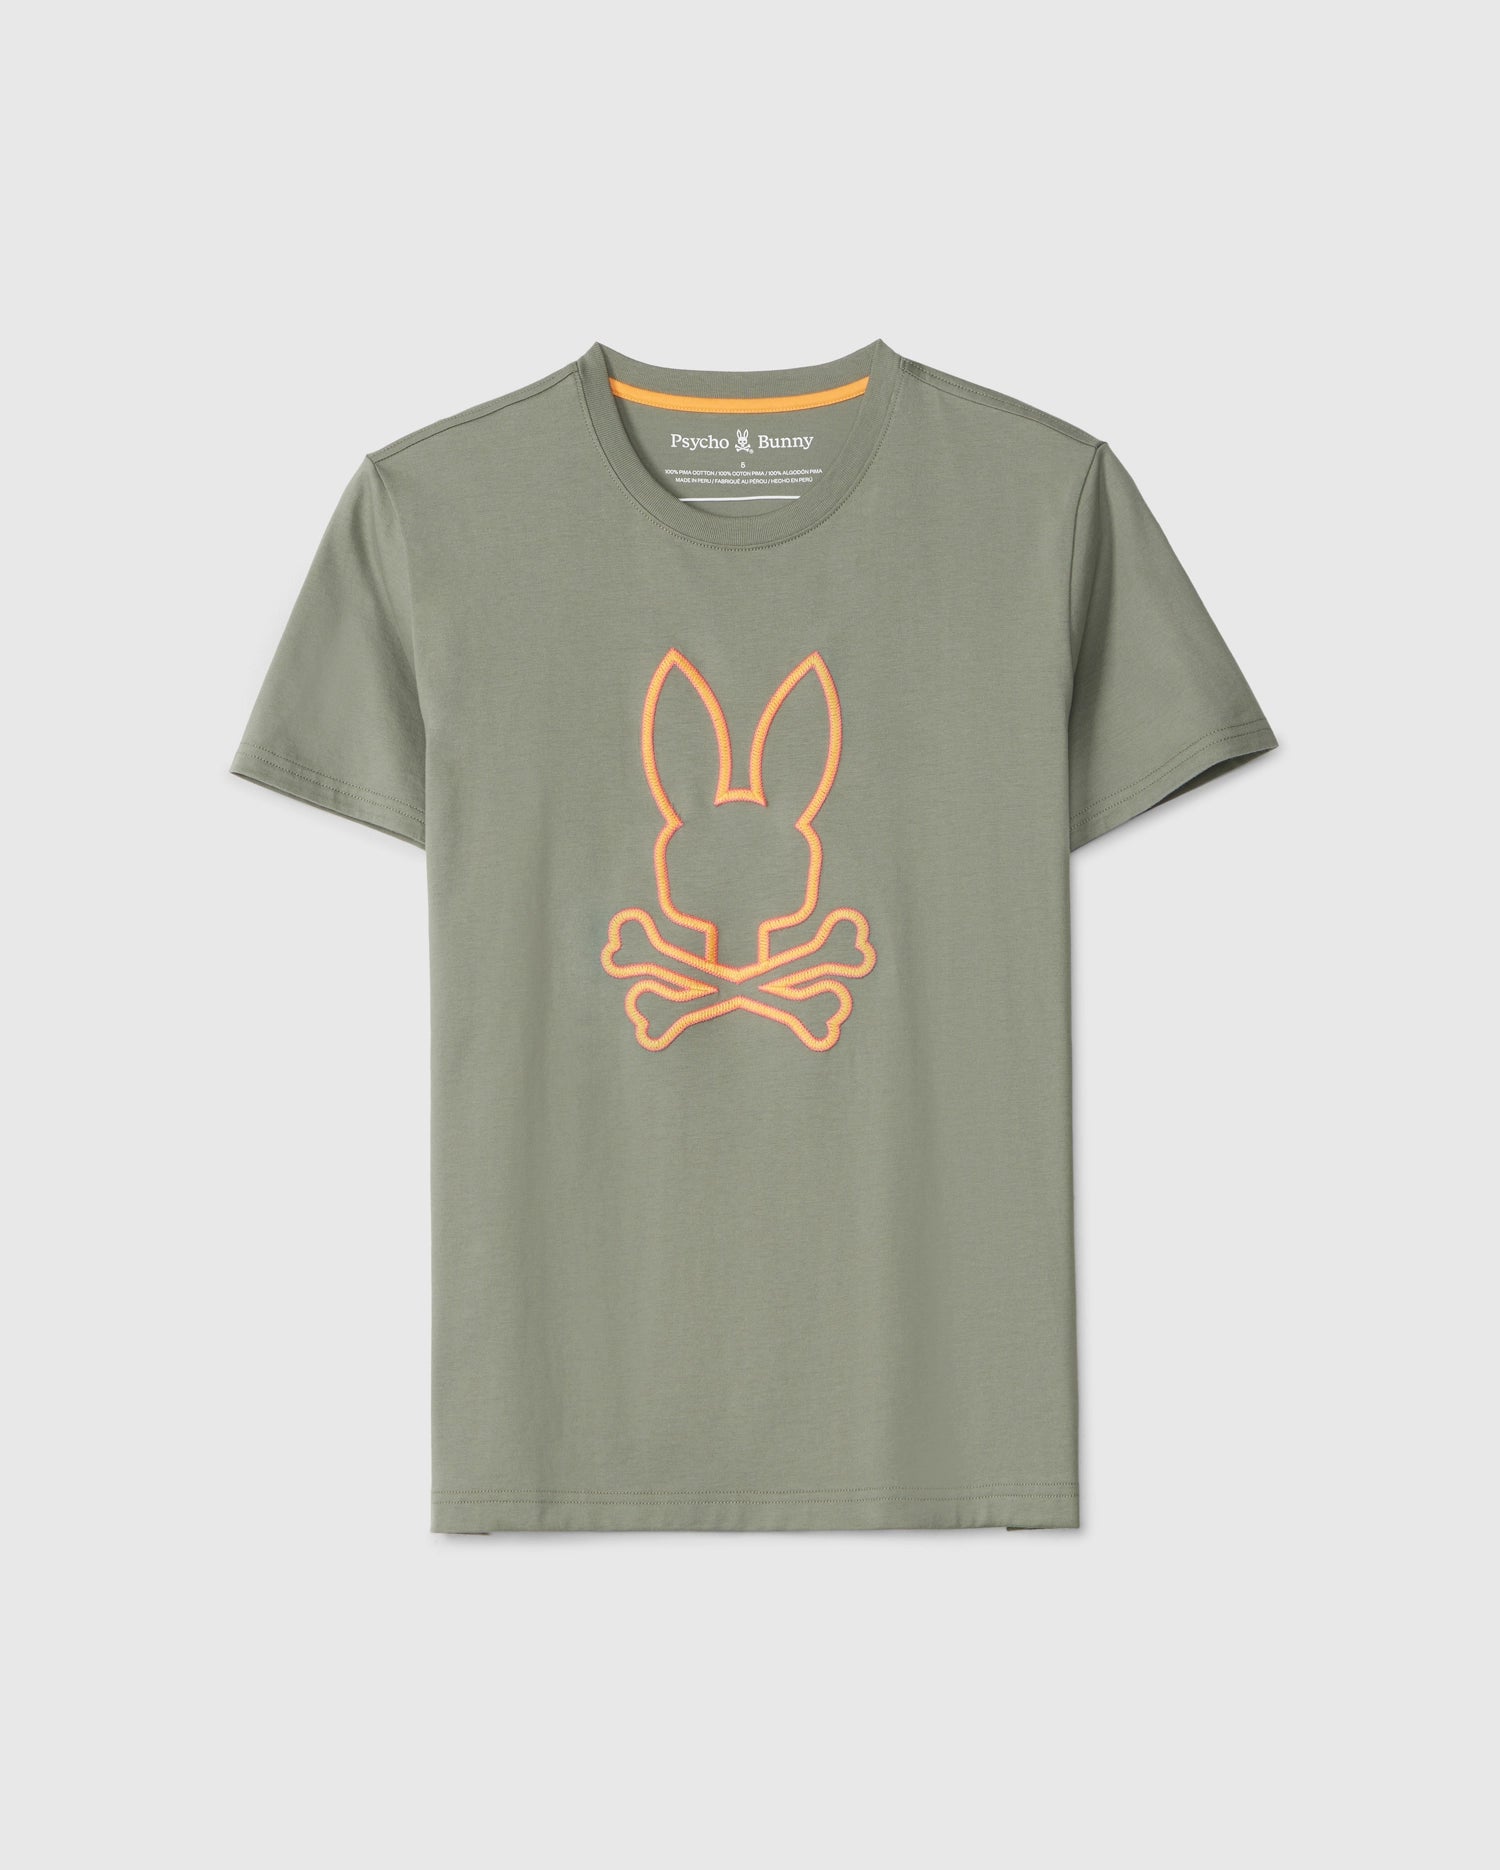 Plain olive green MENS FLOYD GRAPHIC TEE featuring a bright orange embroidered Psycho Bunny logo centered on the chest. The t-shirt is displayed on a neutral background.